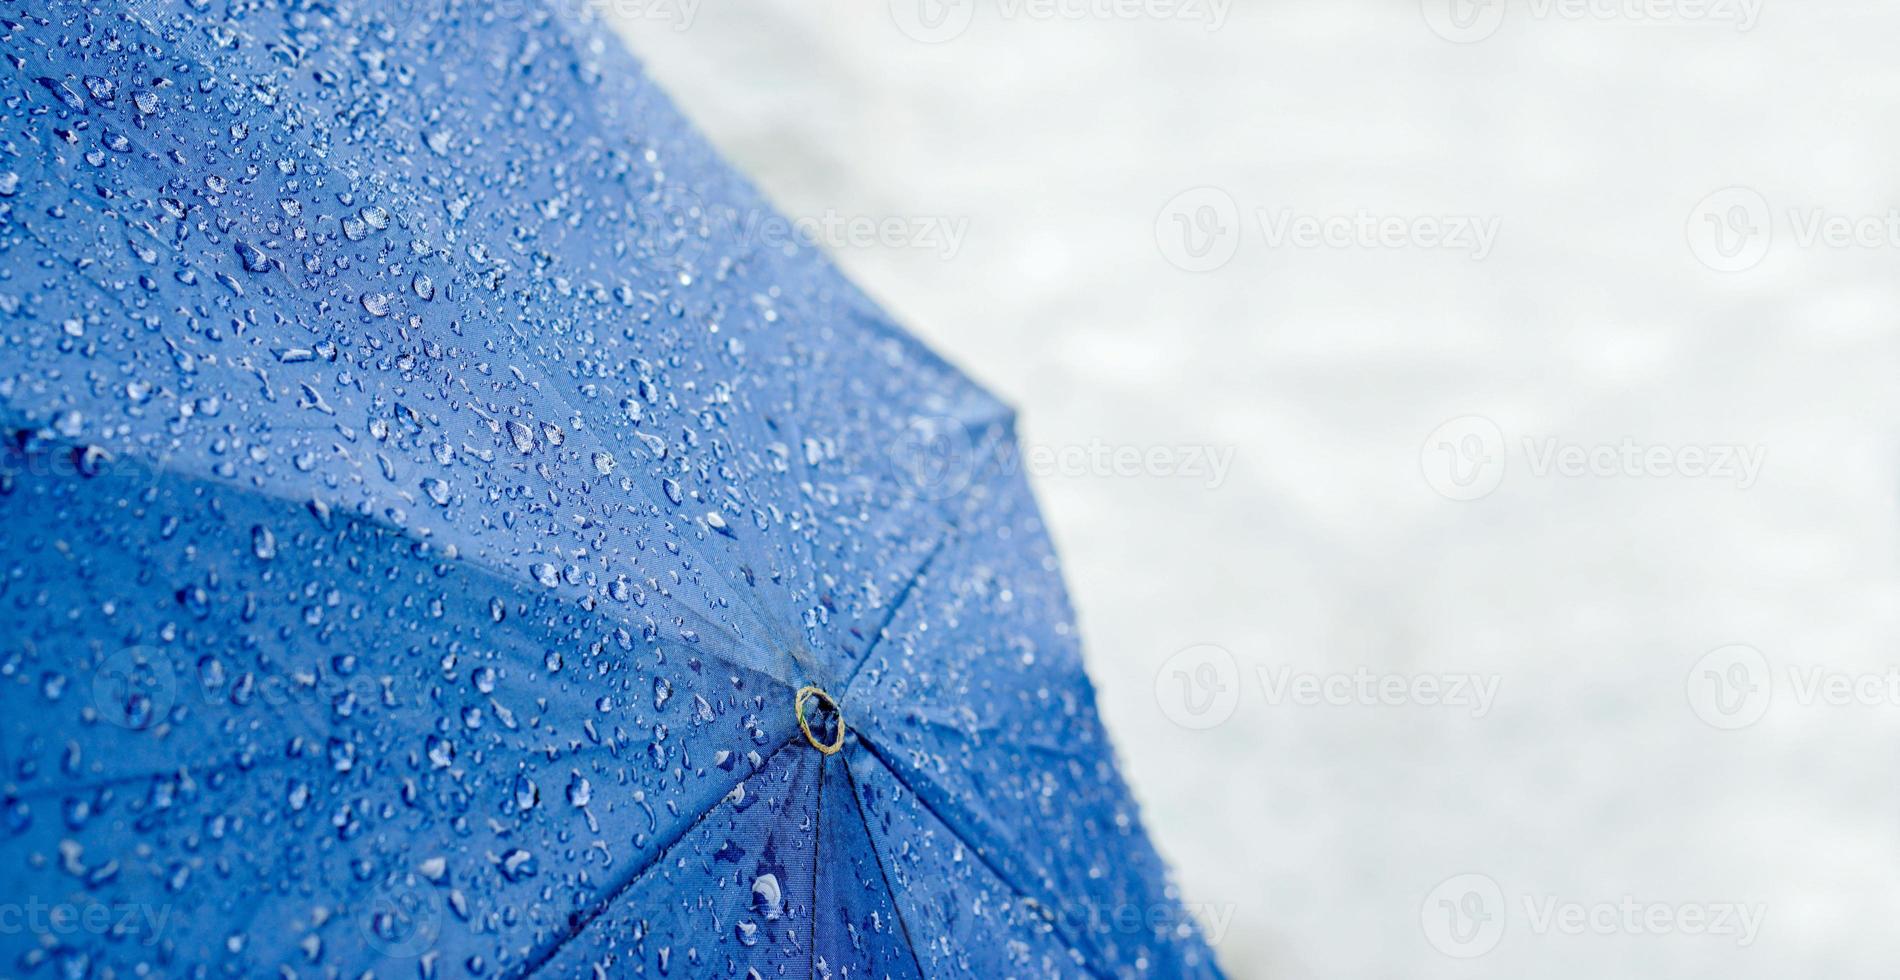 Wide screen of raindrops on blue umbrella with blurry of road on rainy day. photo